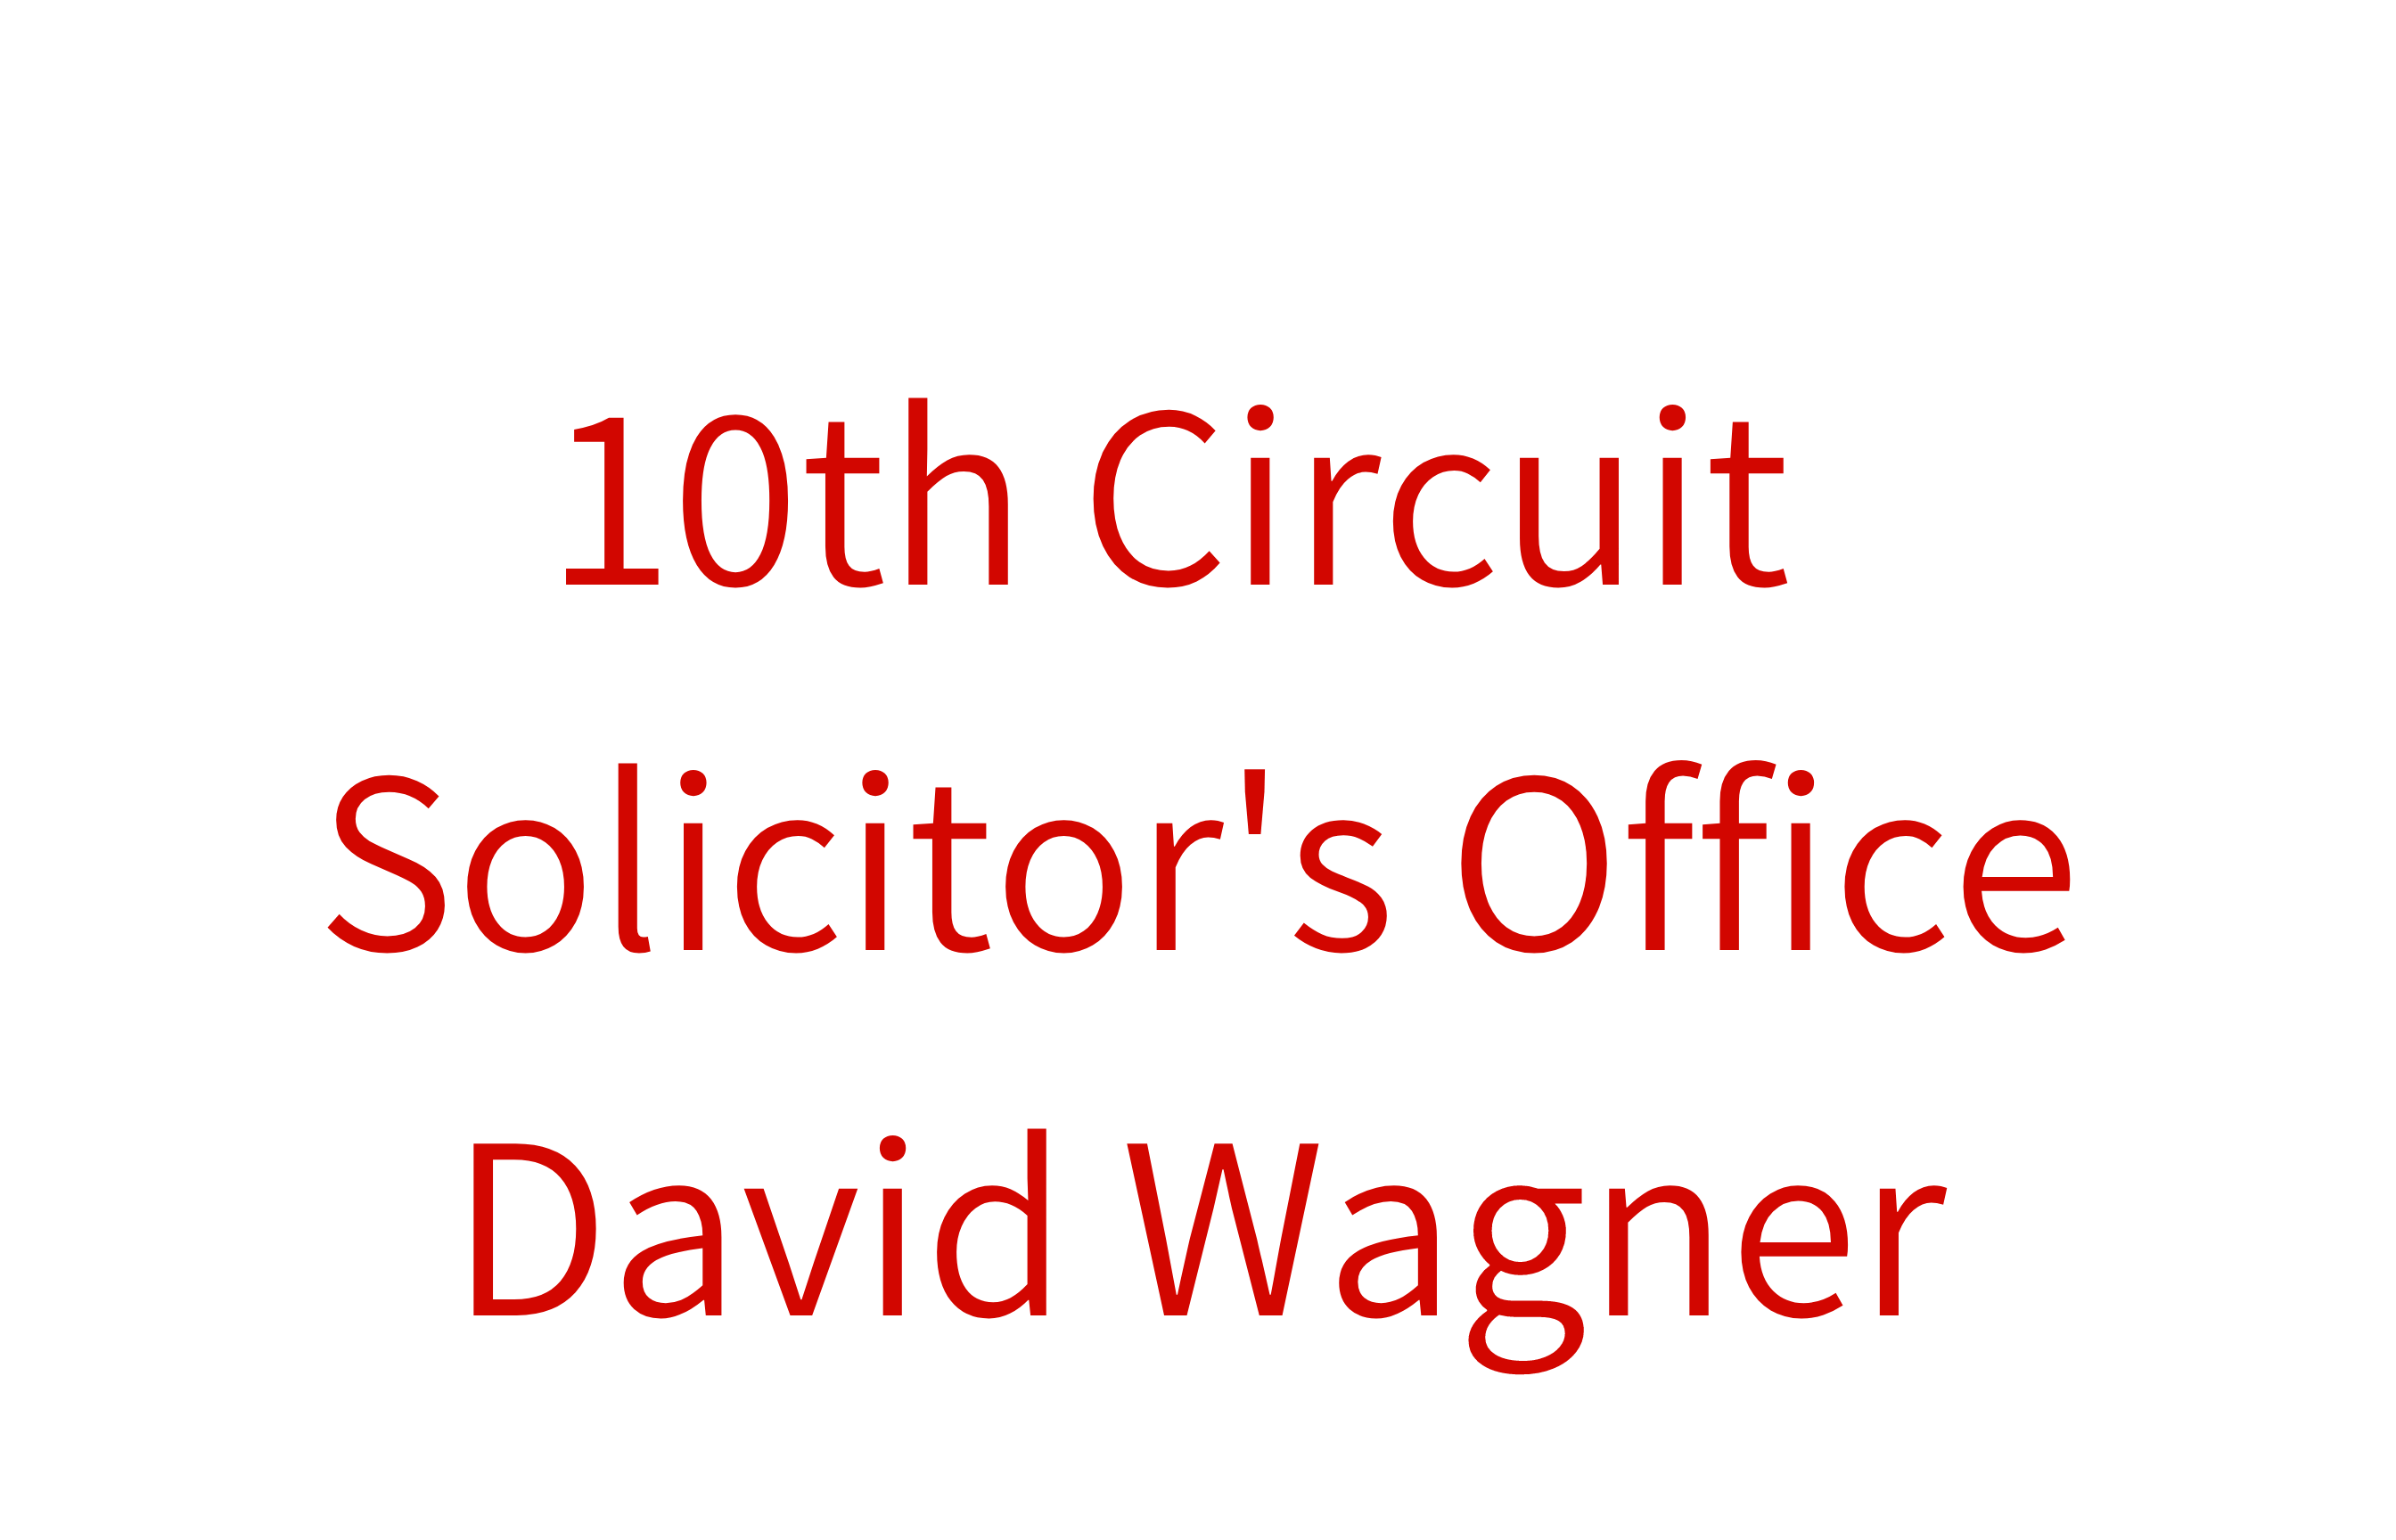 10th Circuit Solicitor’s Office